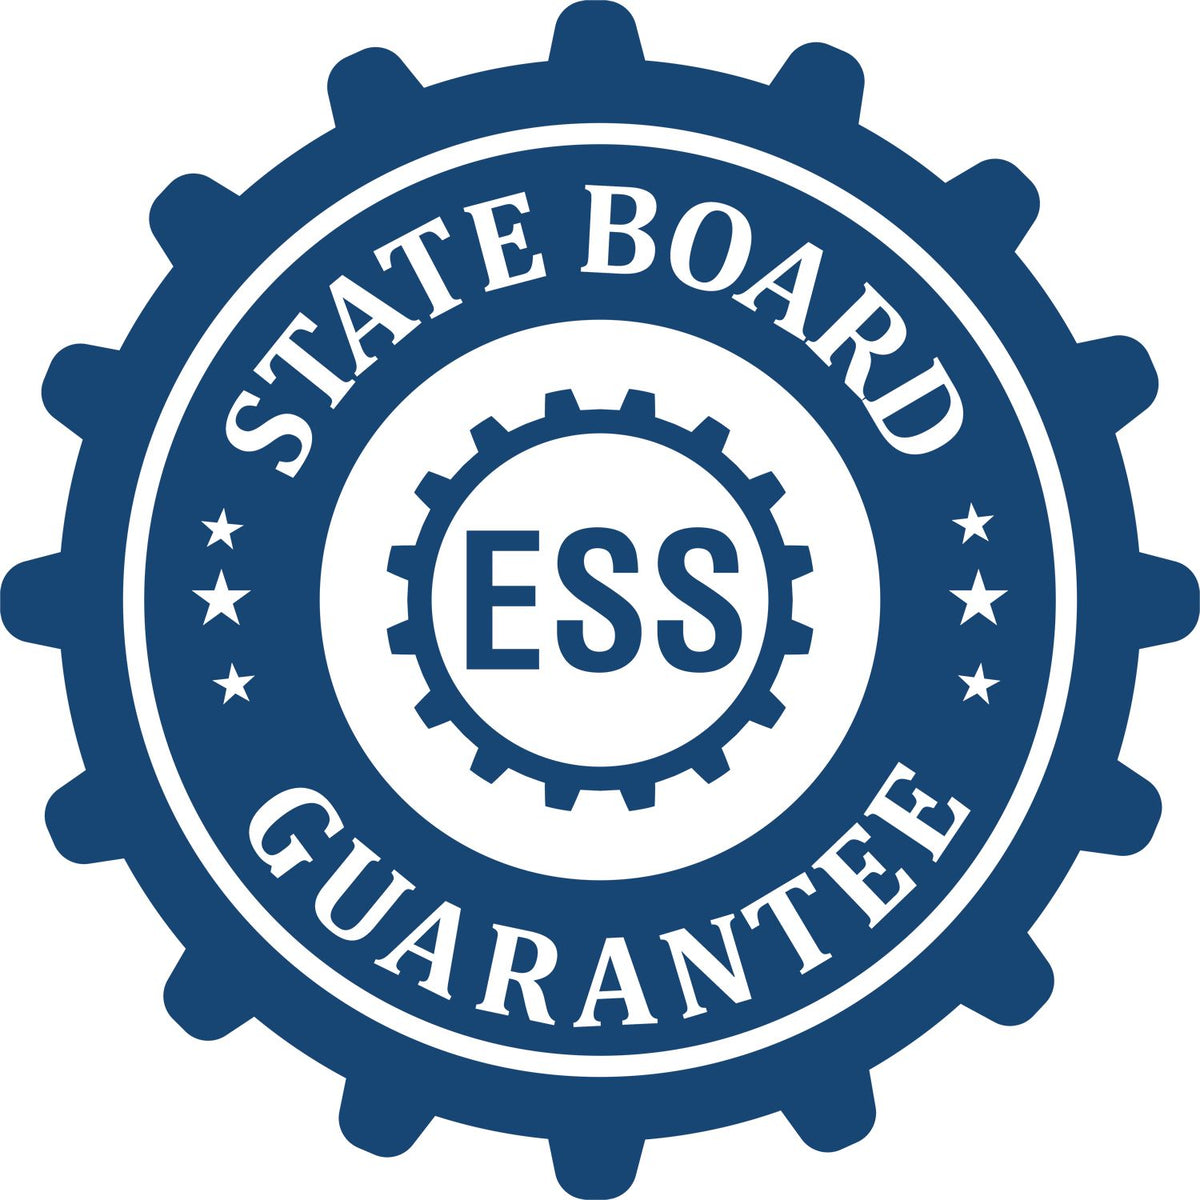 An emblem in a gear shape illustrating a state board guarantee for the Iowa Professional Engineer Seal Stamp product.